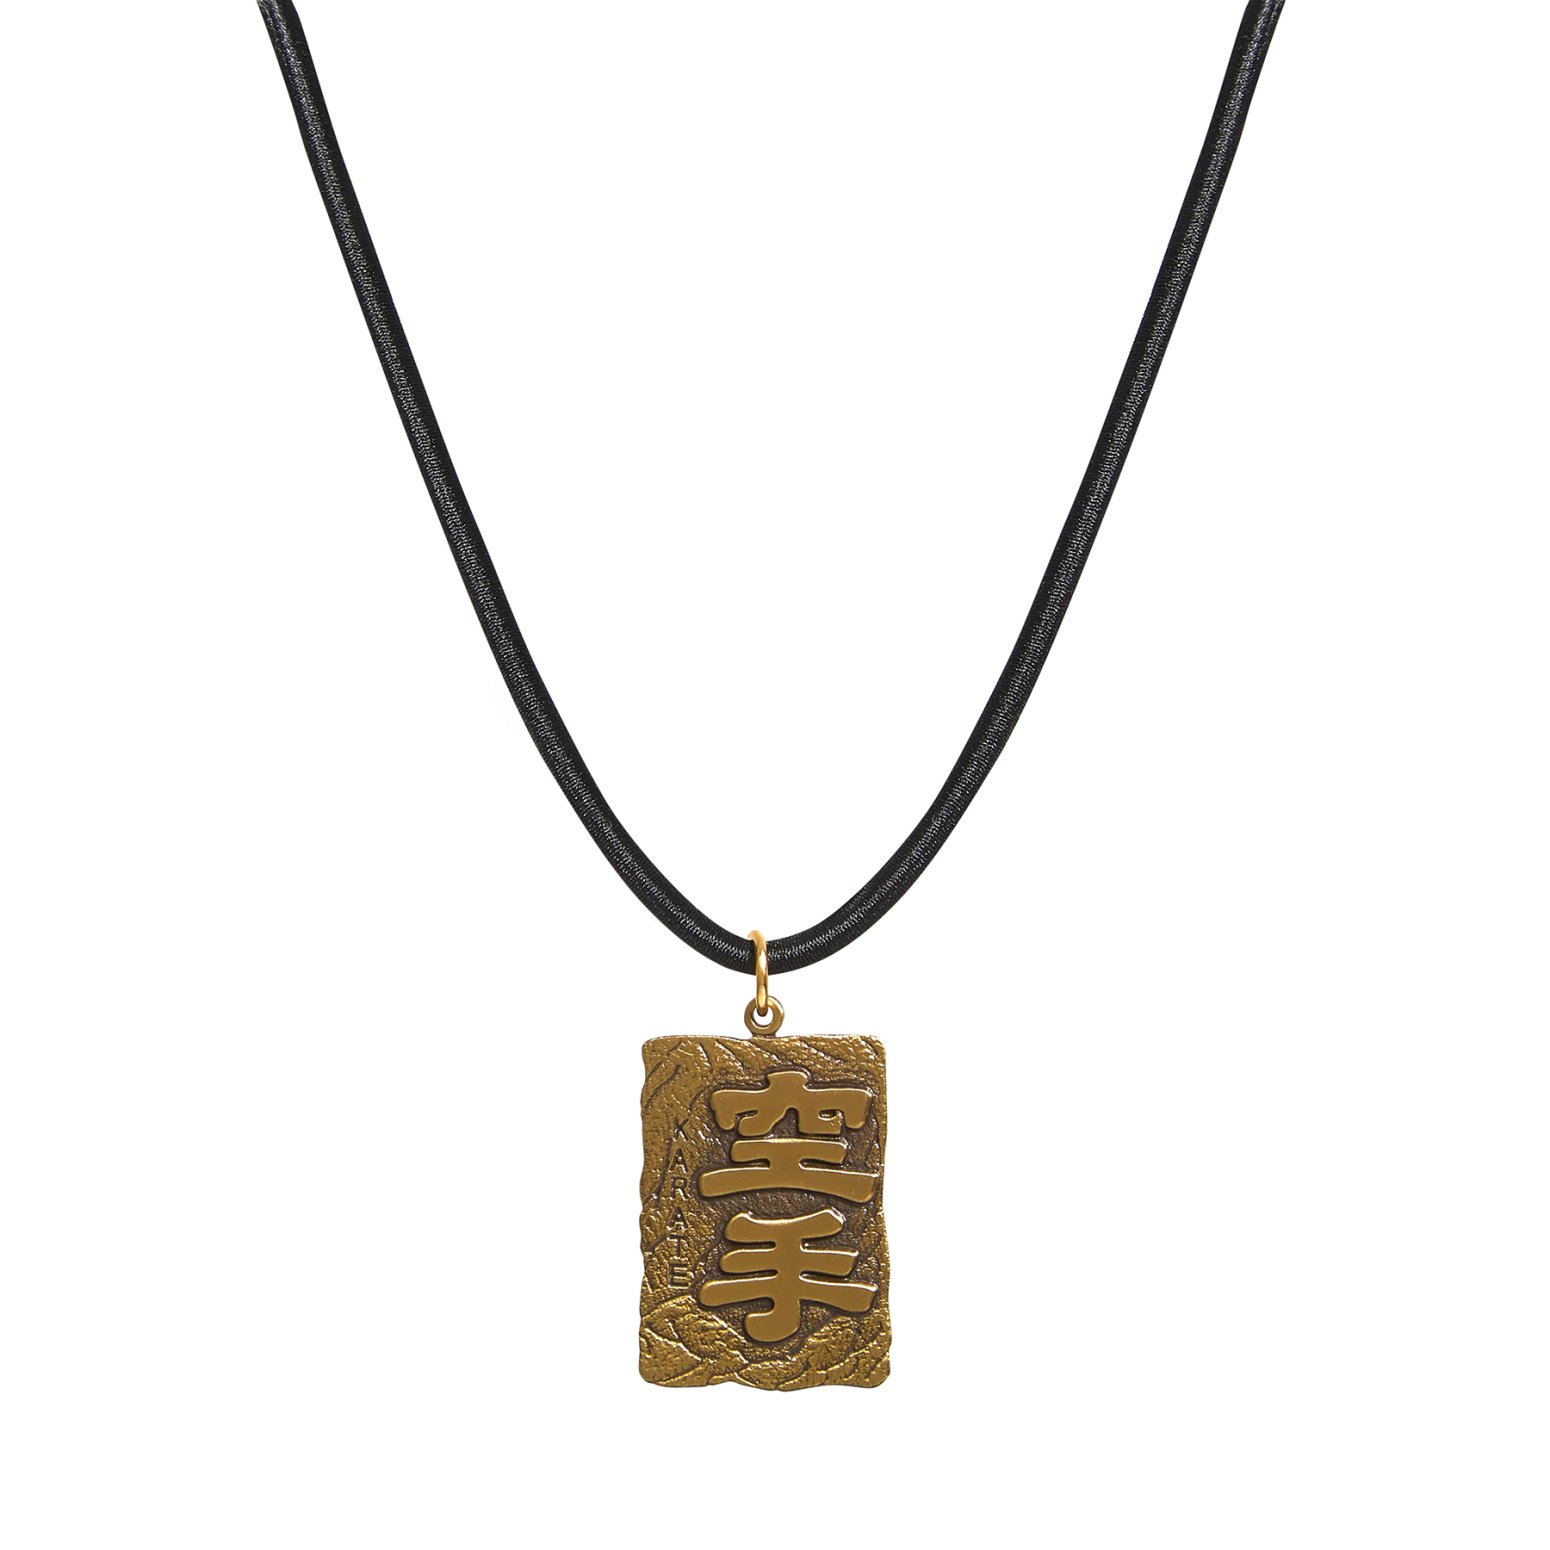 Karate Gold Key Necklace - Click Image to Close